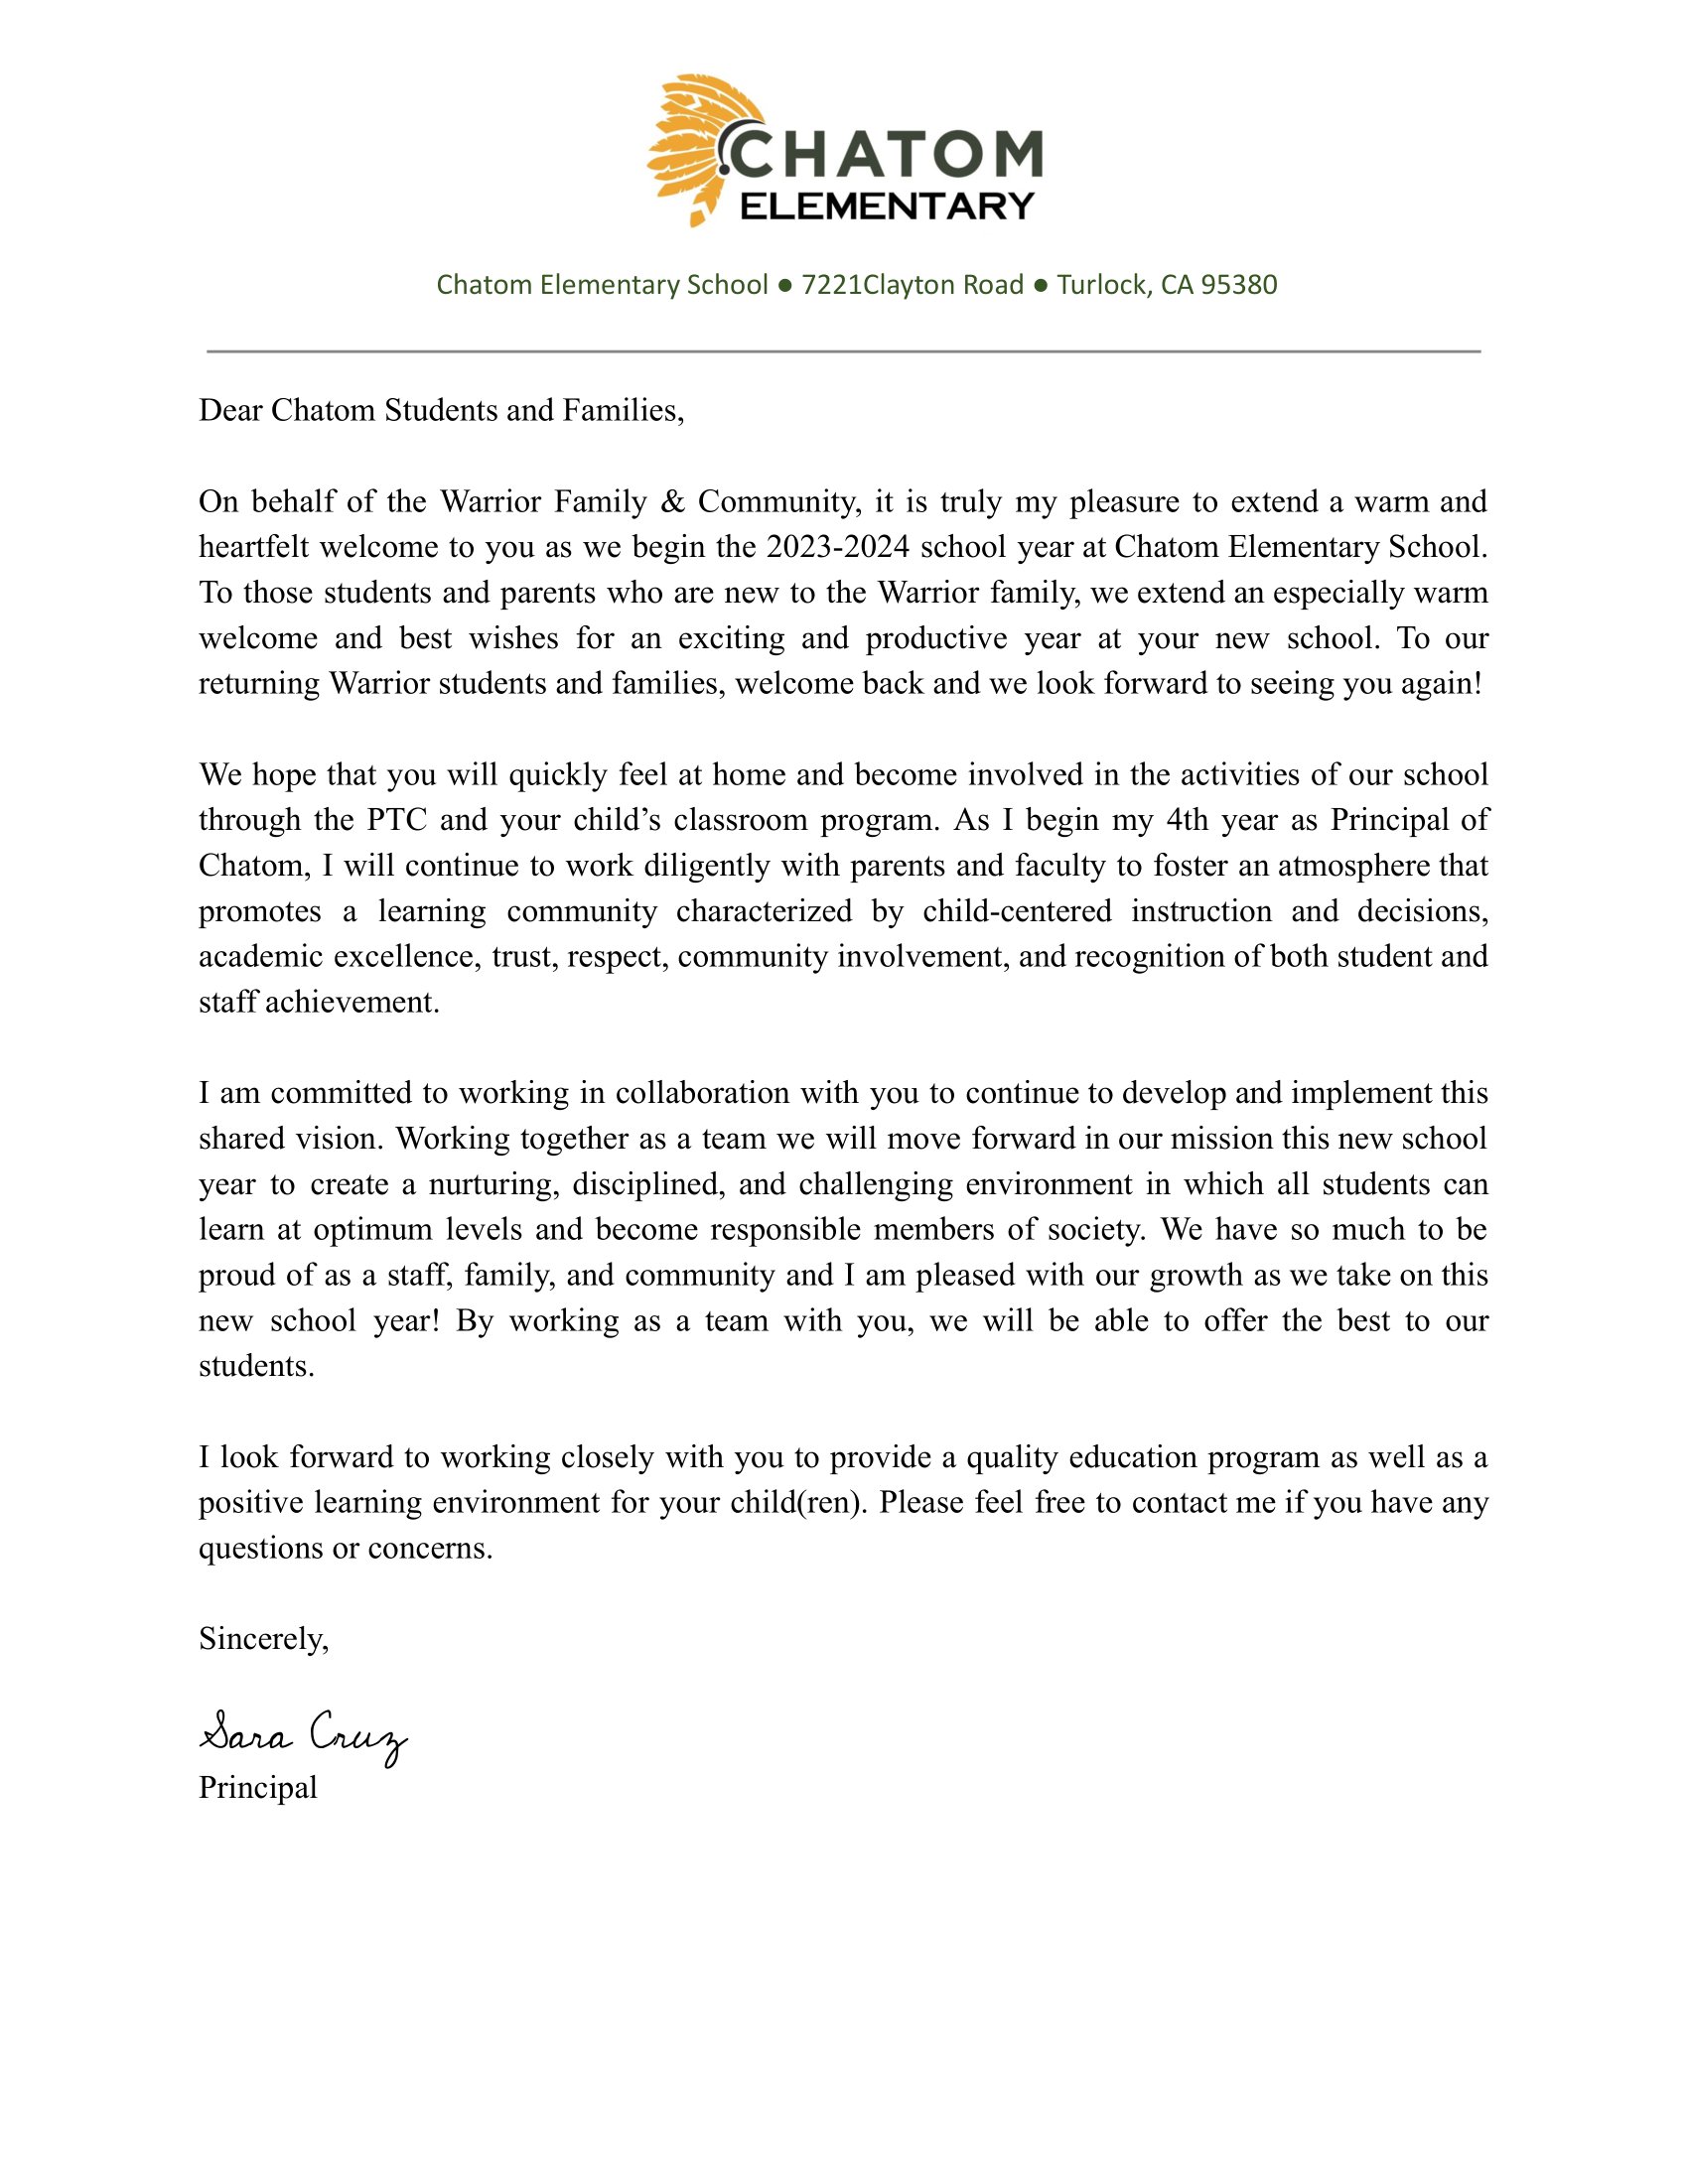 2023-2024 Welcome Letter (english and spanish)-1